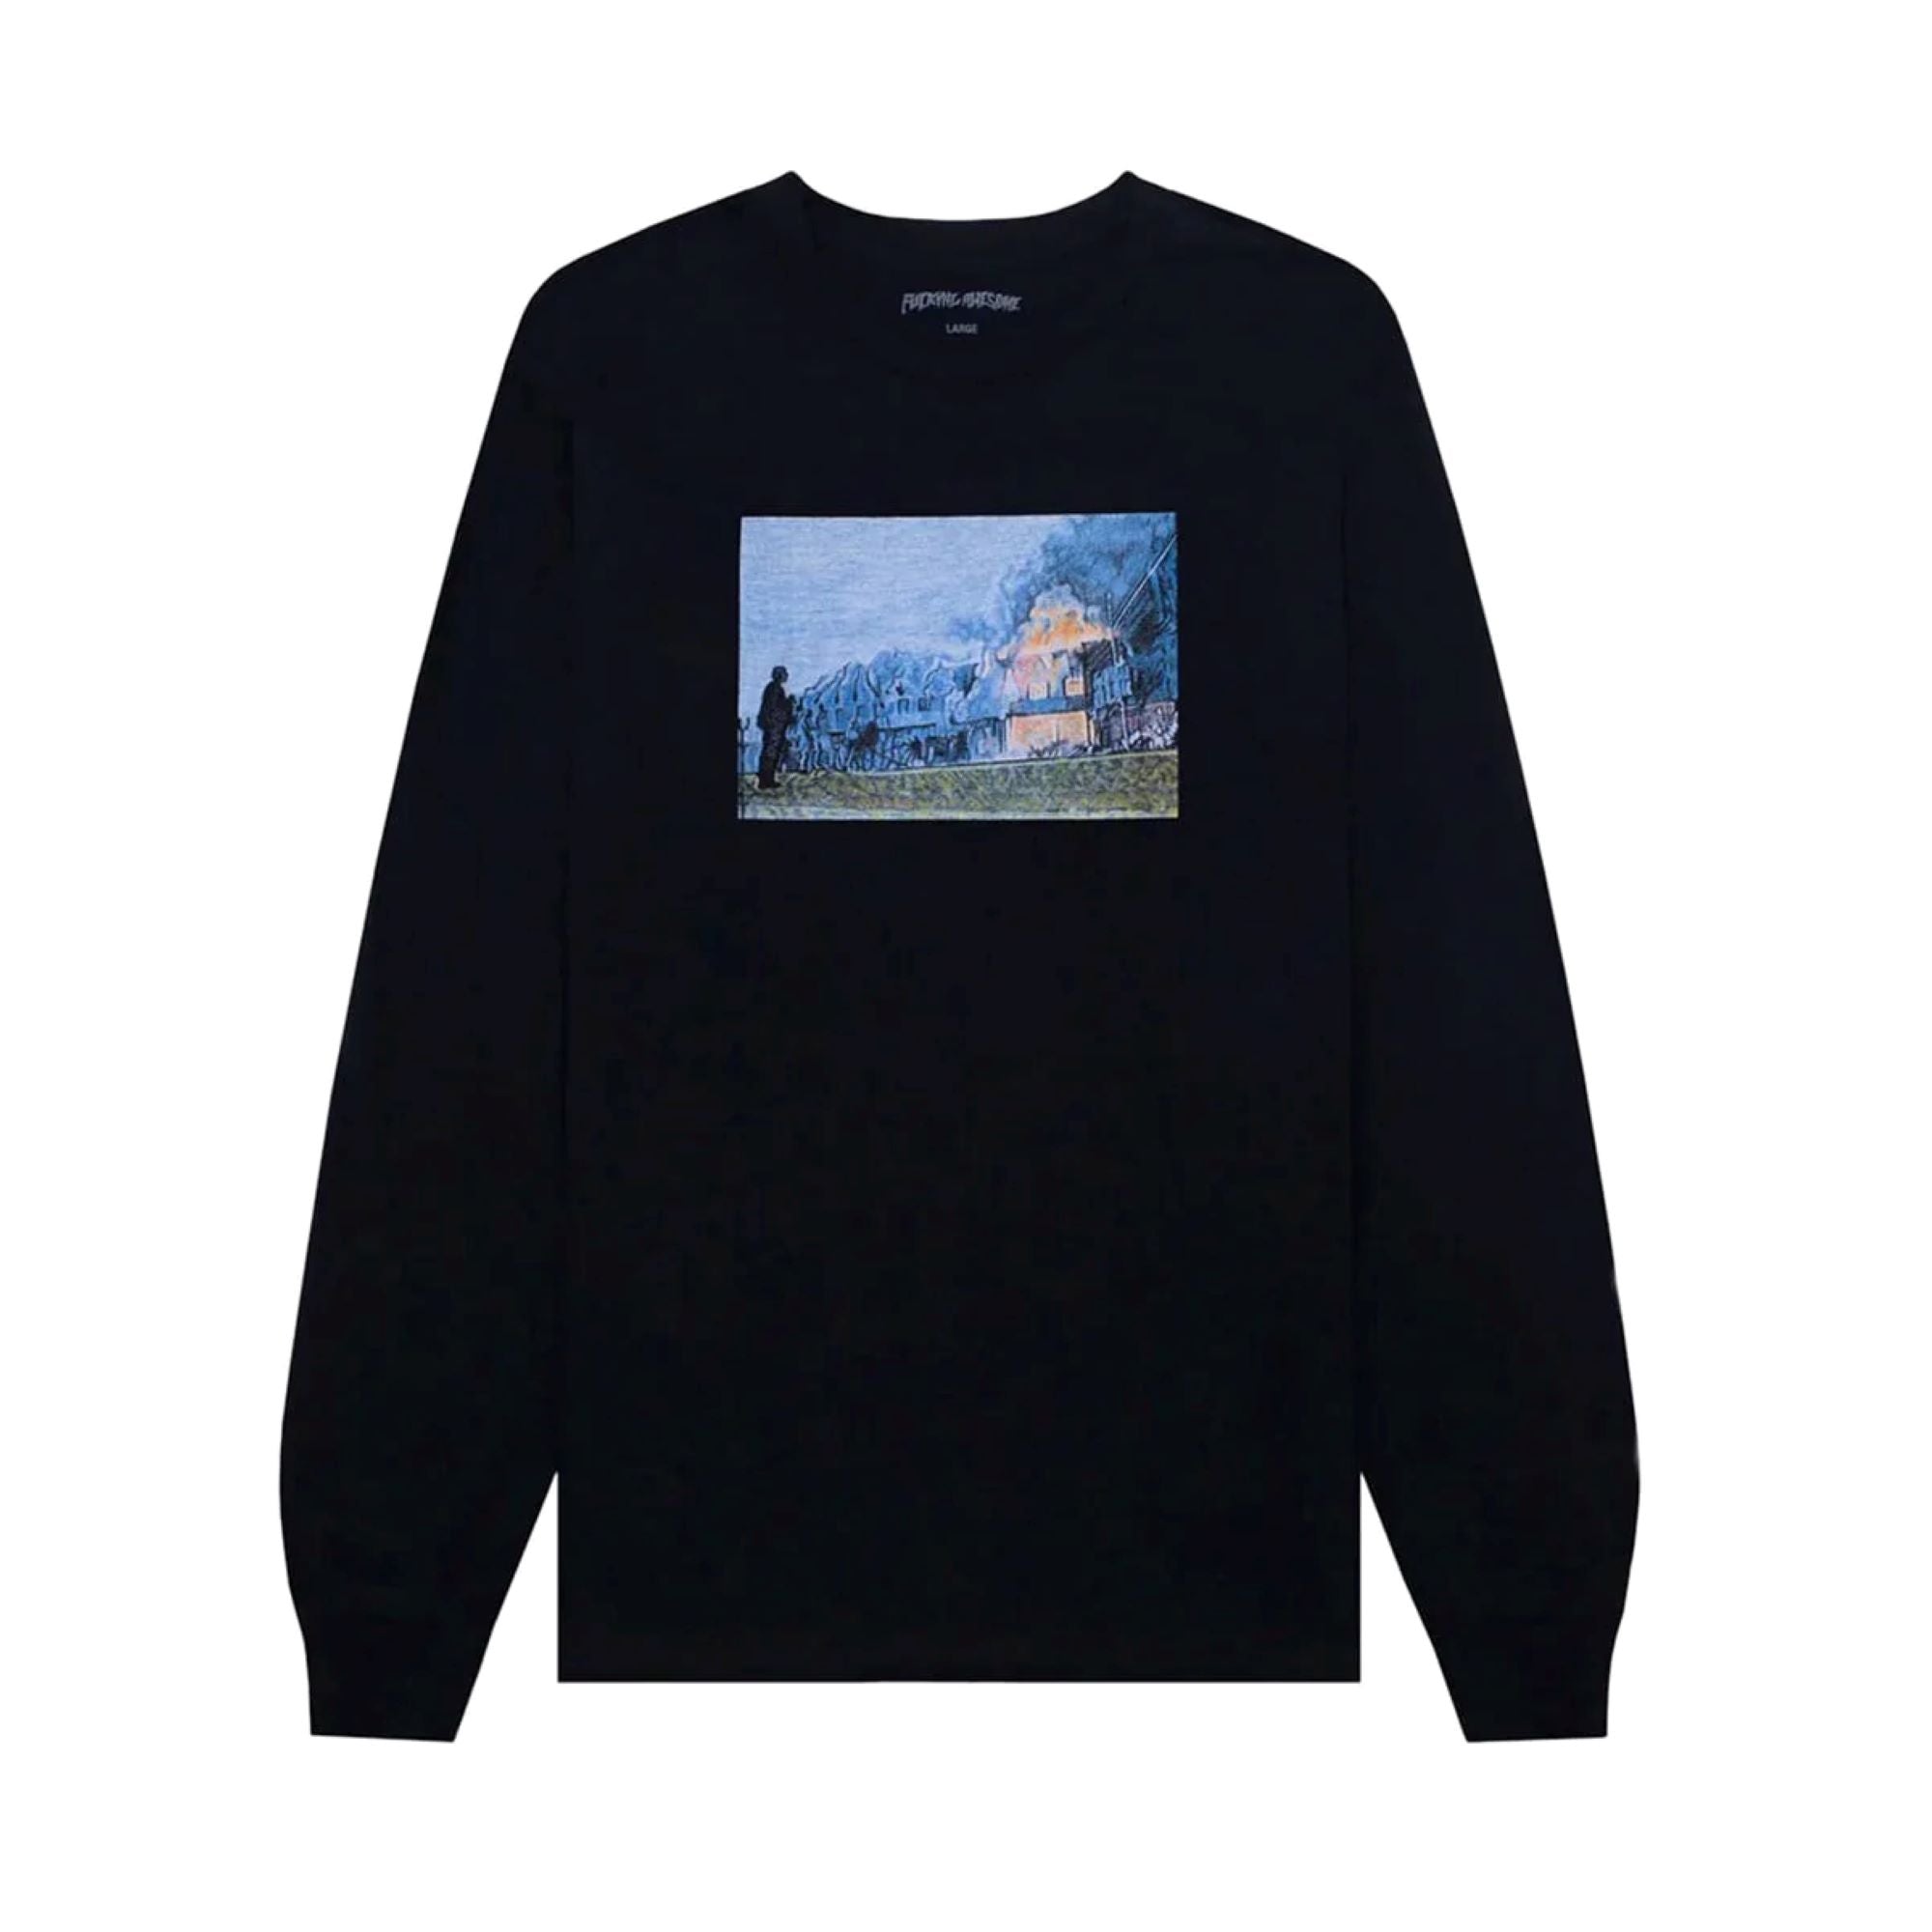 Fucking Awesome - House On Fire L/S Tee - Black